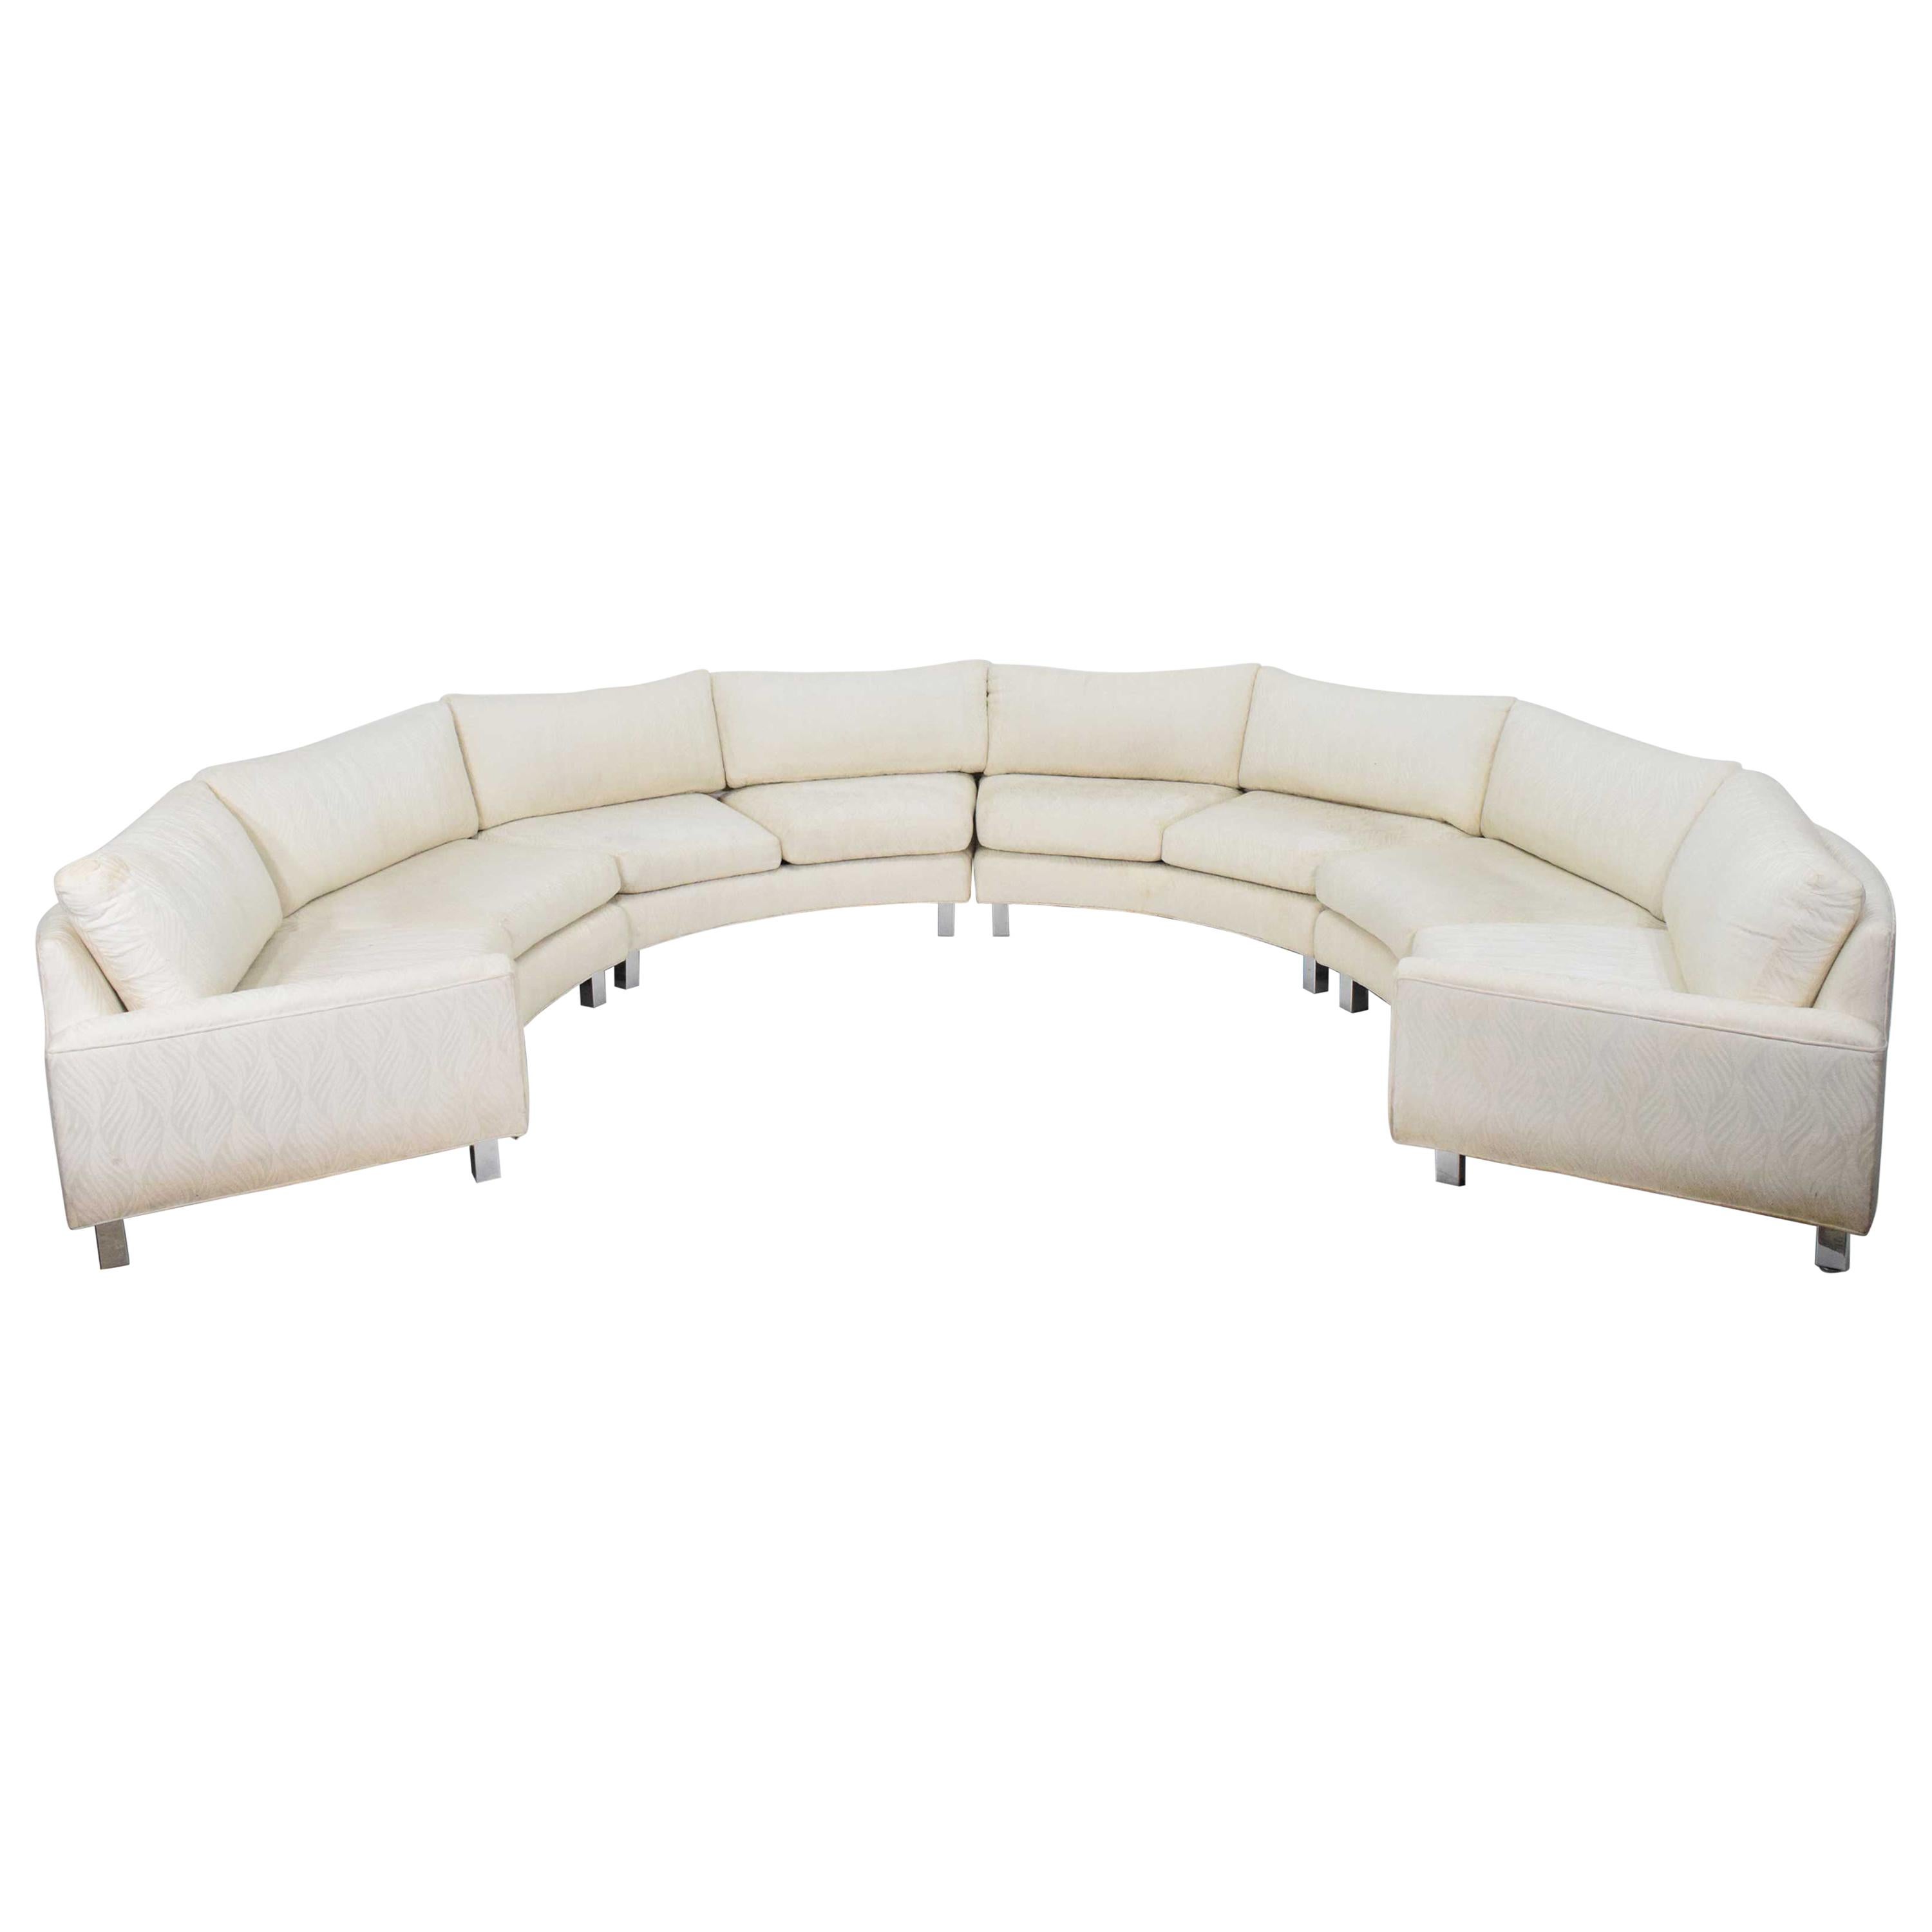 Milo Baughman Four Section Curved Sectional Sofa in White For Sale